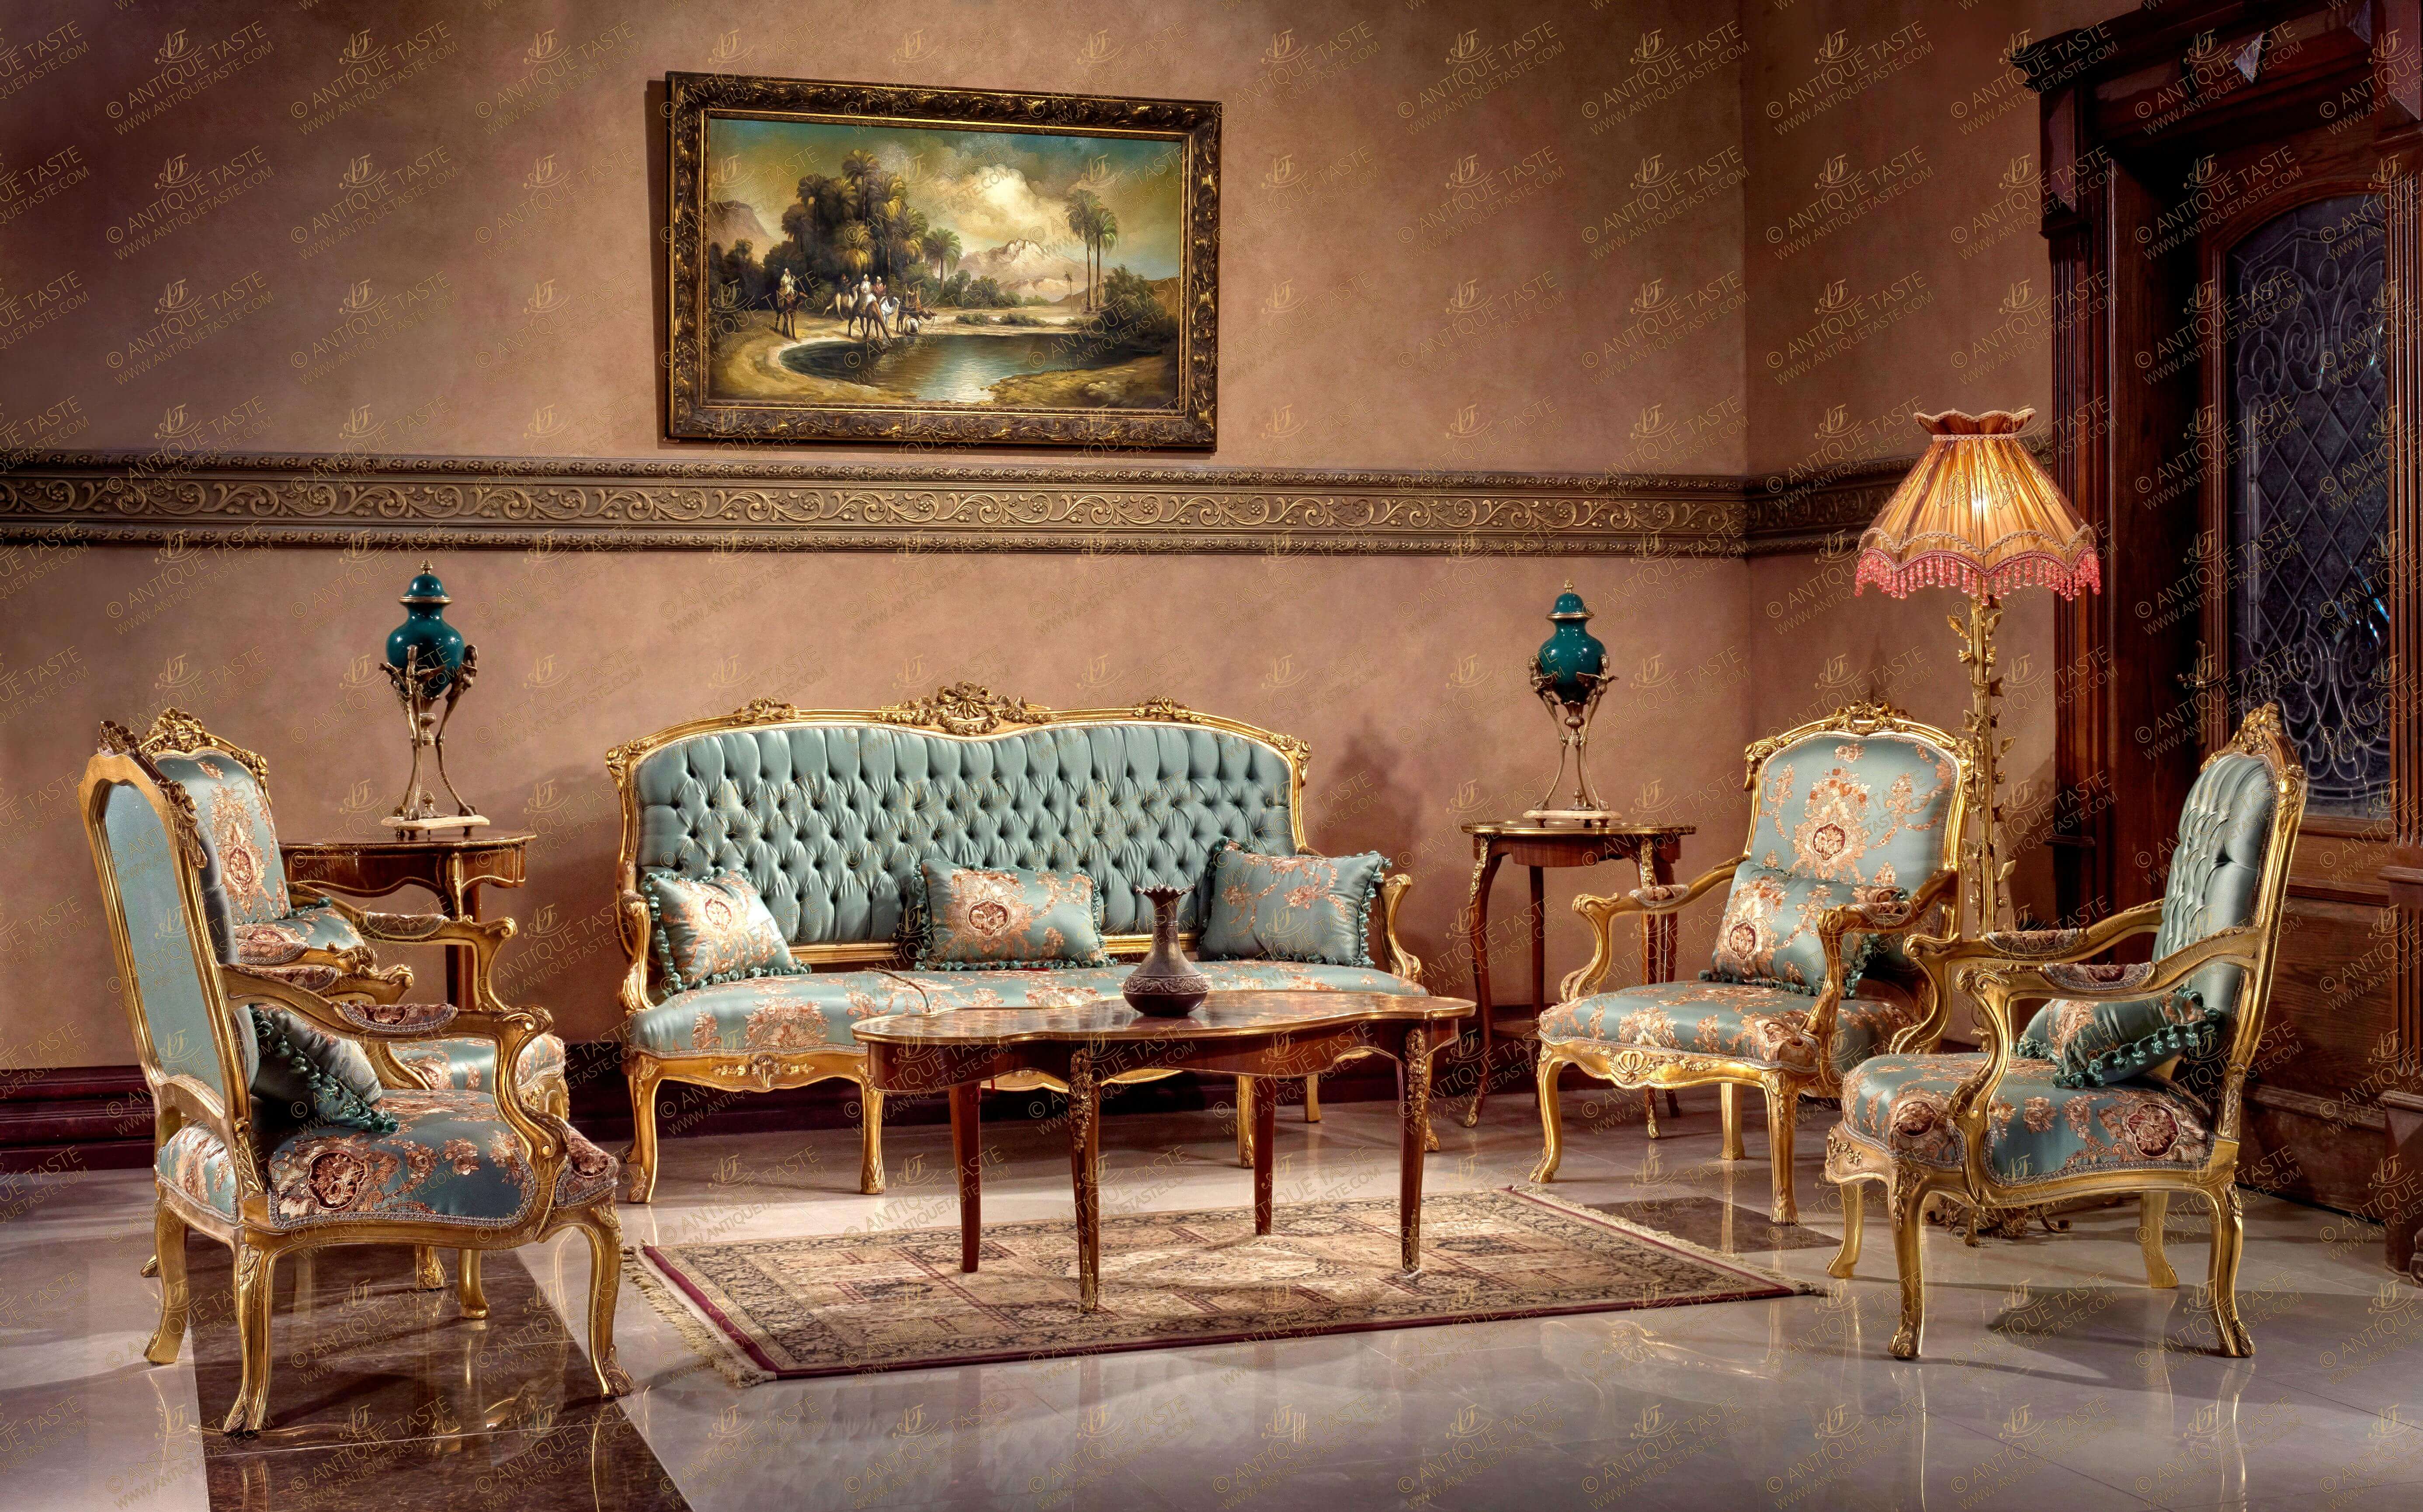 A sensational and most elegant French late 18th century Louis XV style Sofa Set; hand carved, French foil gilded and patinated, comprising of one three seater sofa and four armchairs, the sofa and pair of armchairs has tufted back, the fine set is upholstered in breathtaking pair of matching damask silk light blue fabric, plain and it's matching with foliate and floral designs; the five pieces are delicately decorated with hand carvings of acanthus leaves, pierced floral tied ribbons, blossoming swaging garlands, bay leaves and branches; raised on bold cabriole legs and built with sophisticated scrolling arms